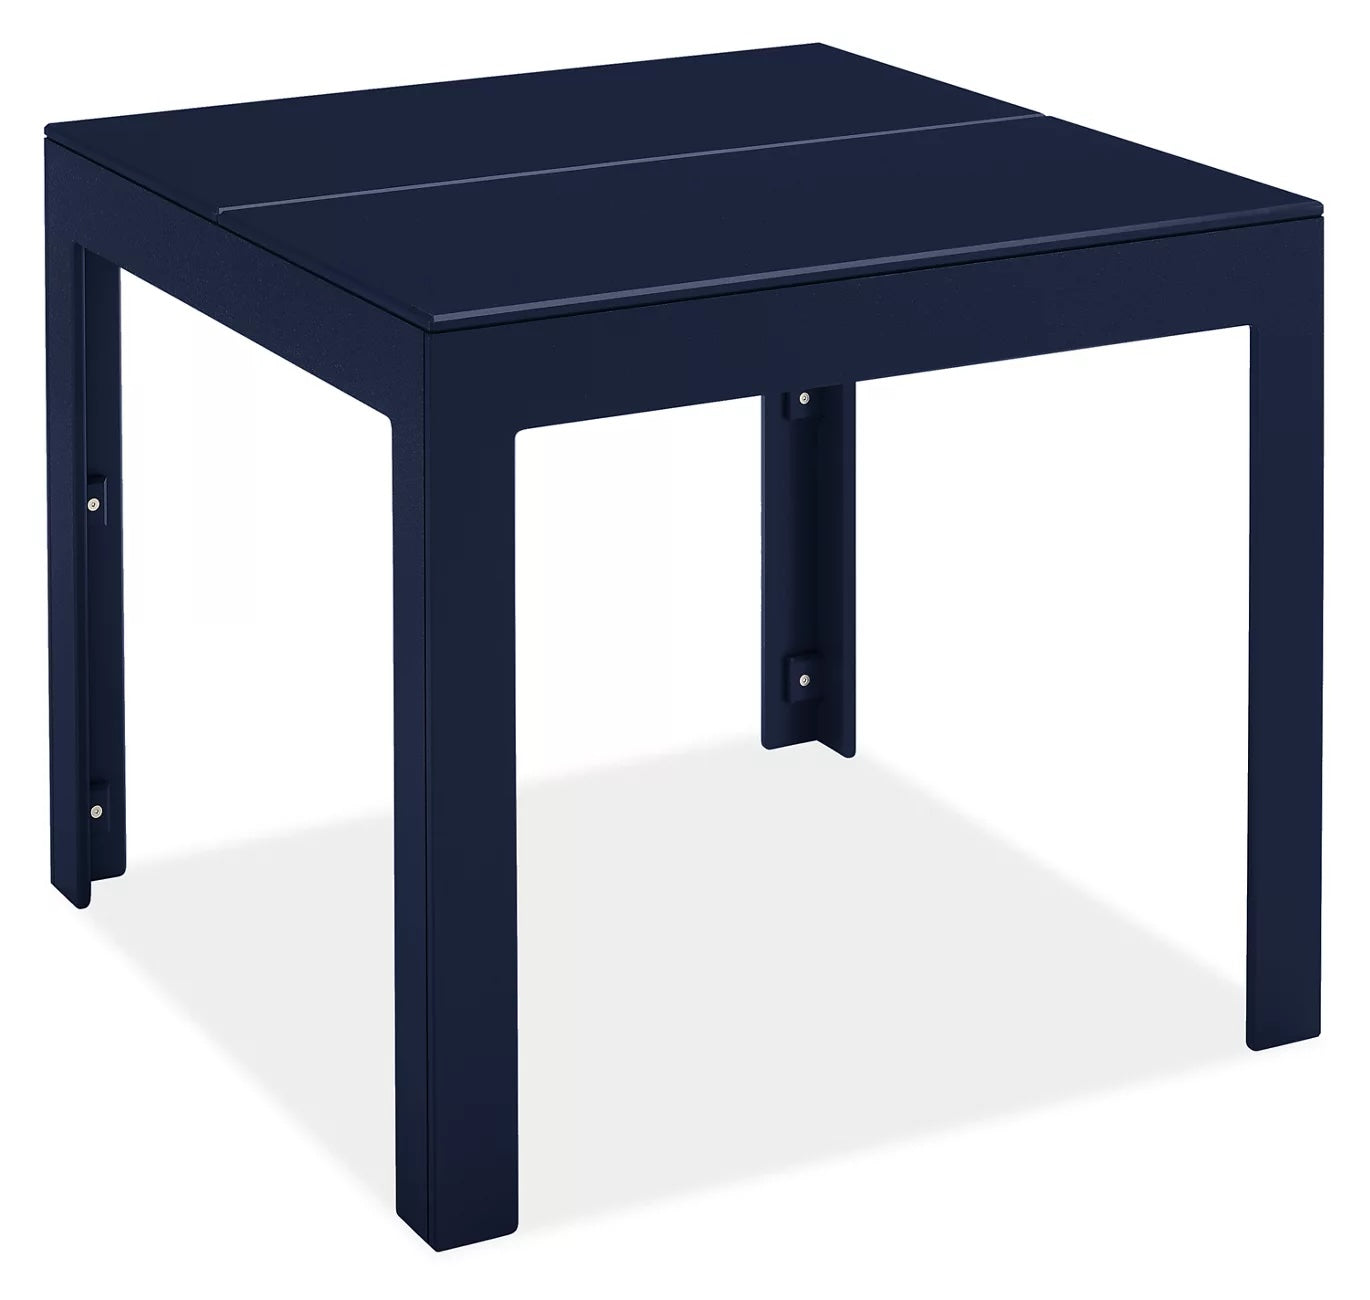 Square 36" Dining Table, Employee Sale